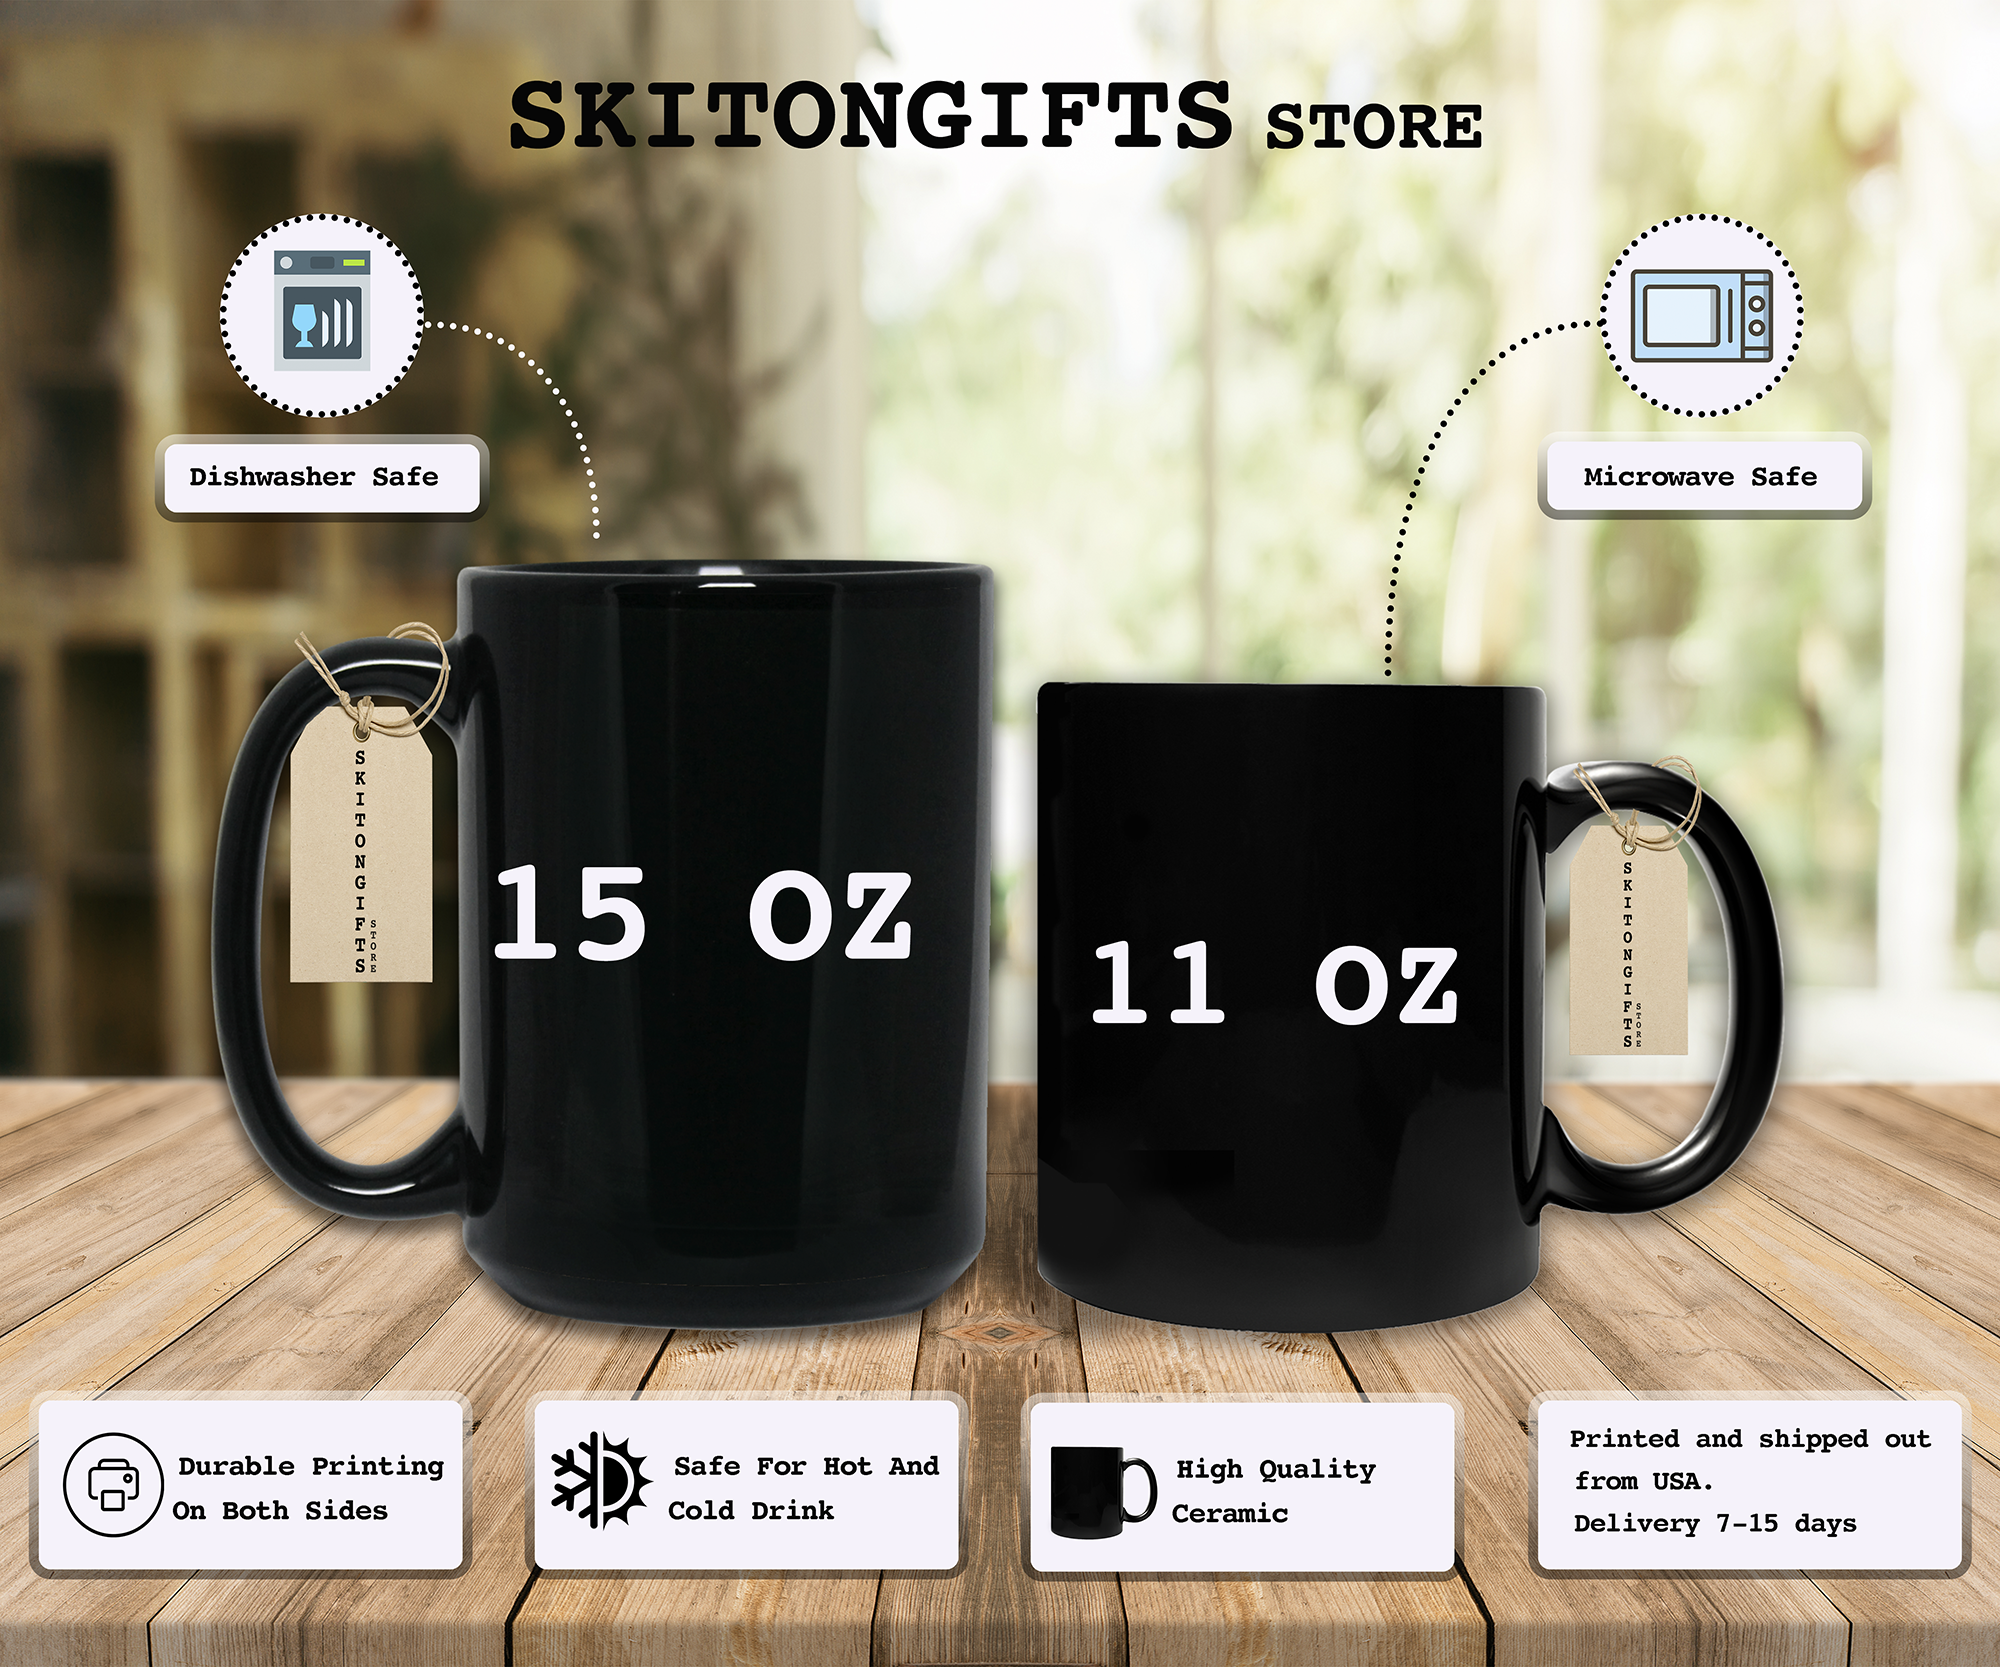 Skitongifts Funny Ceramic Novelty Coffee Mug Being My Sister Is Really The Only Gift You Need - Love You Sister Funny vEm8ukP